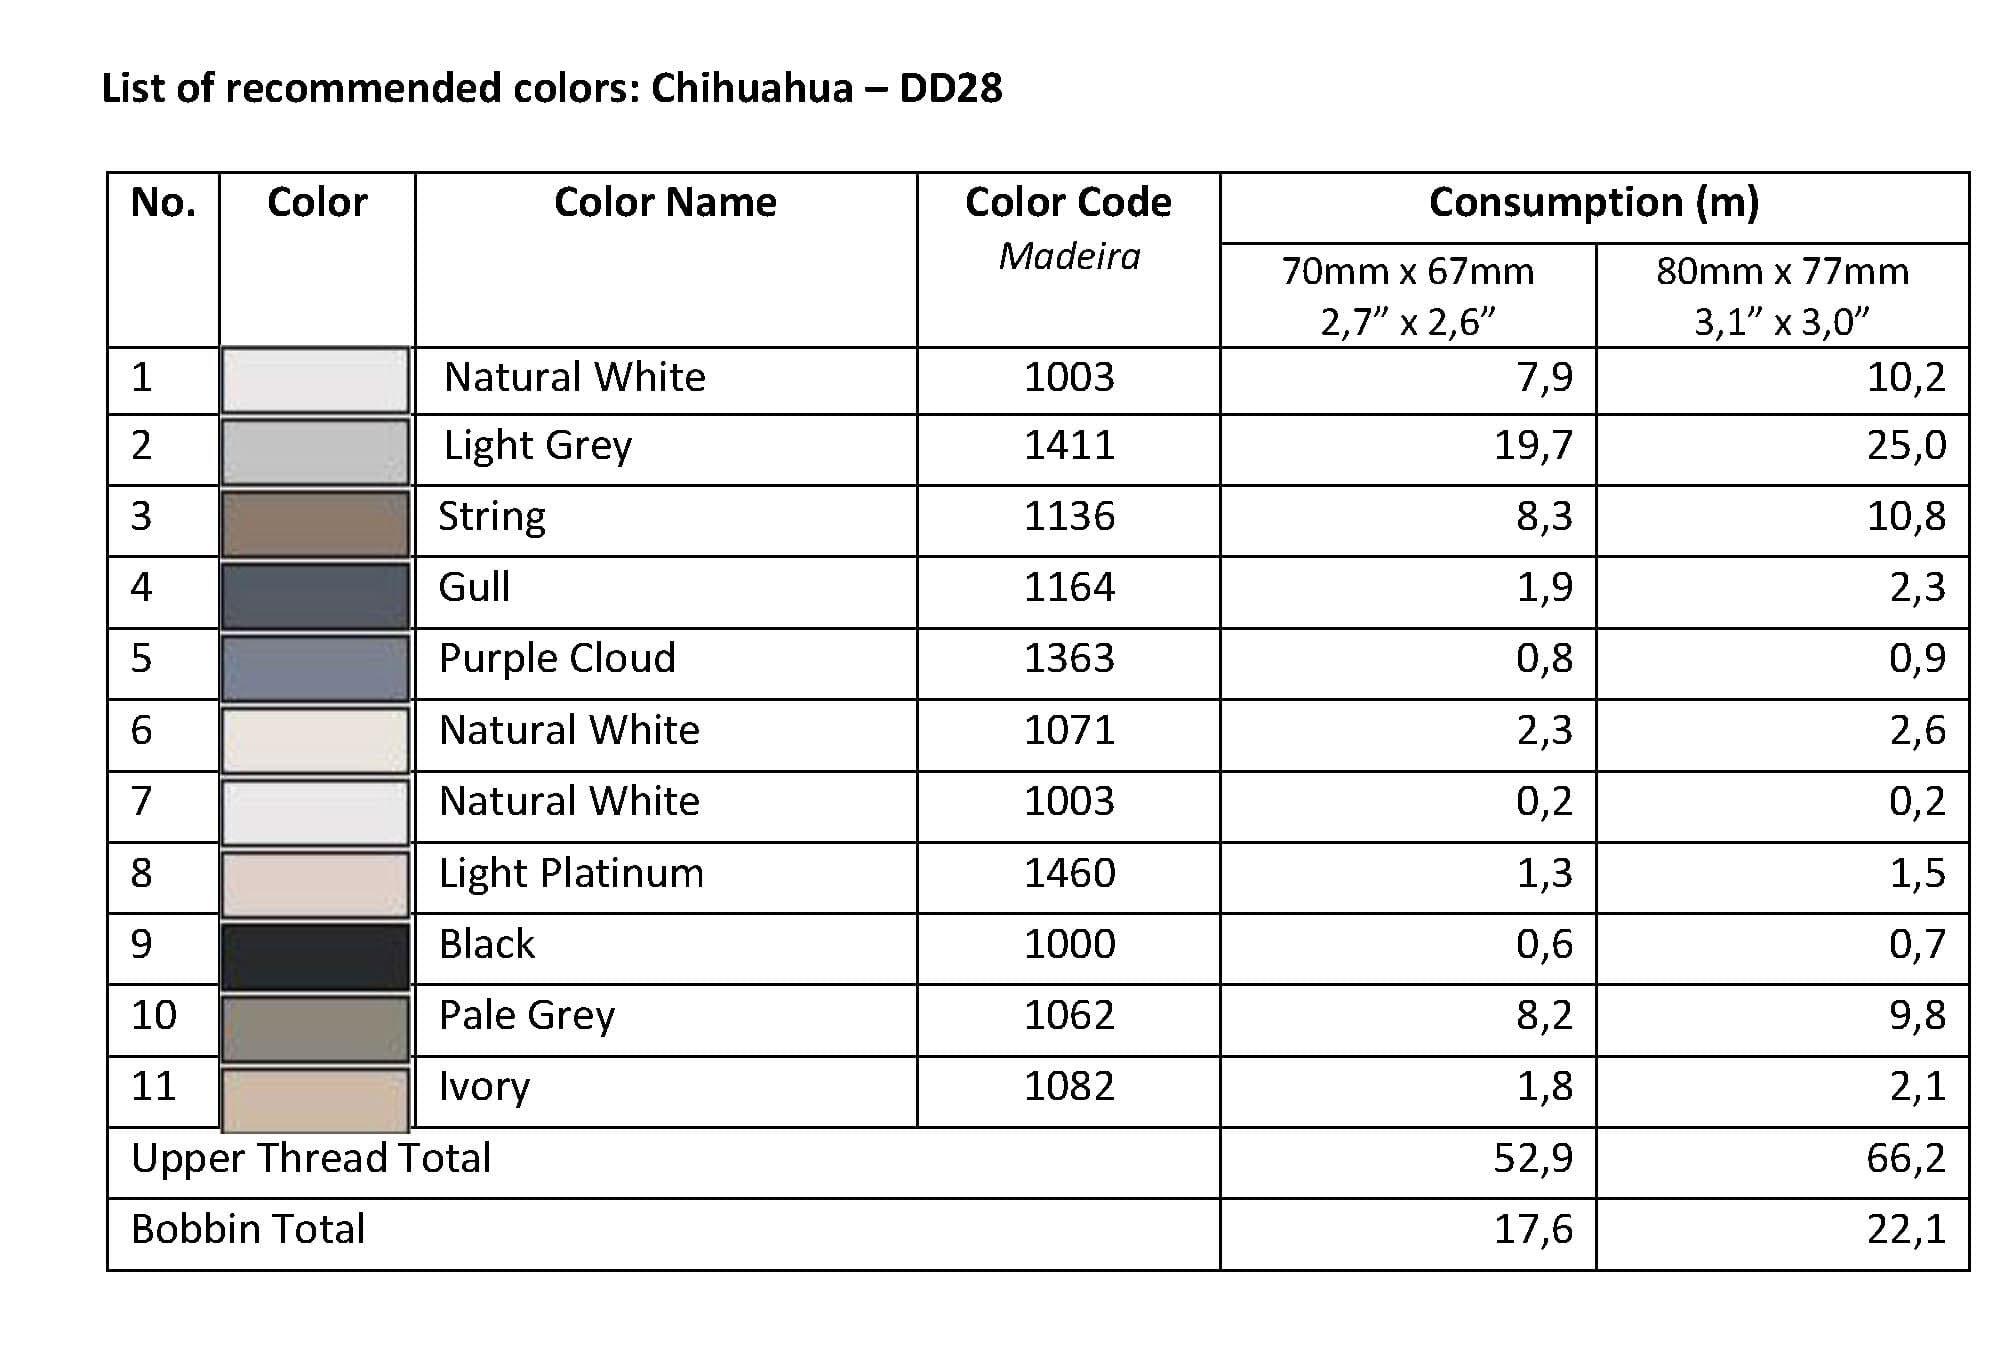 List of Recommended Colors - Chihuahua DD28